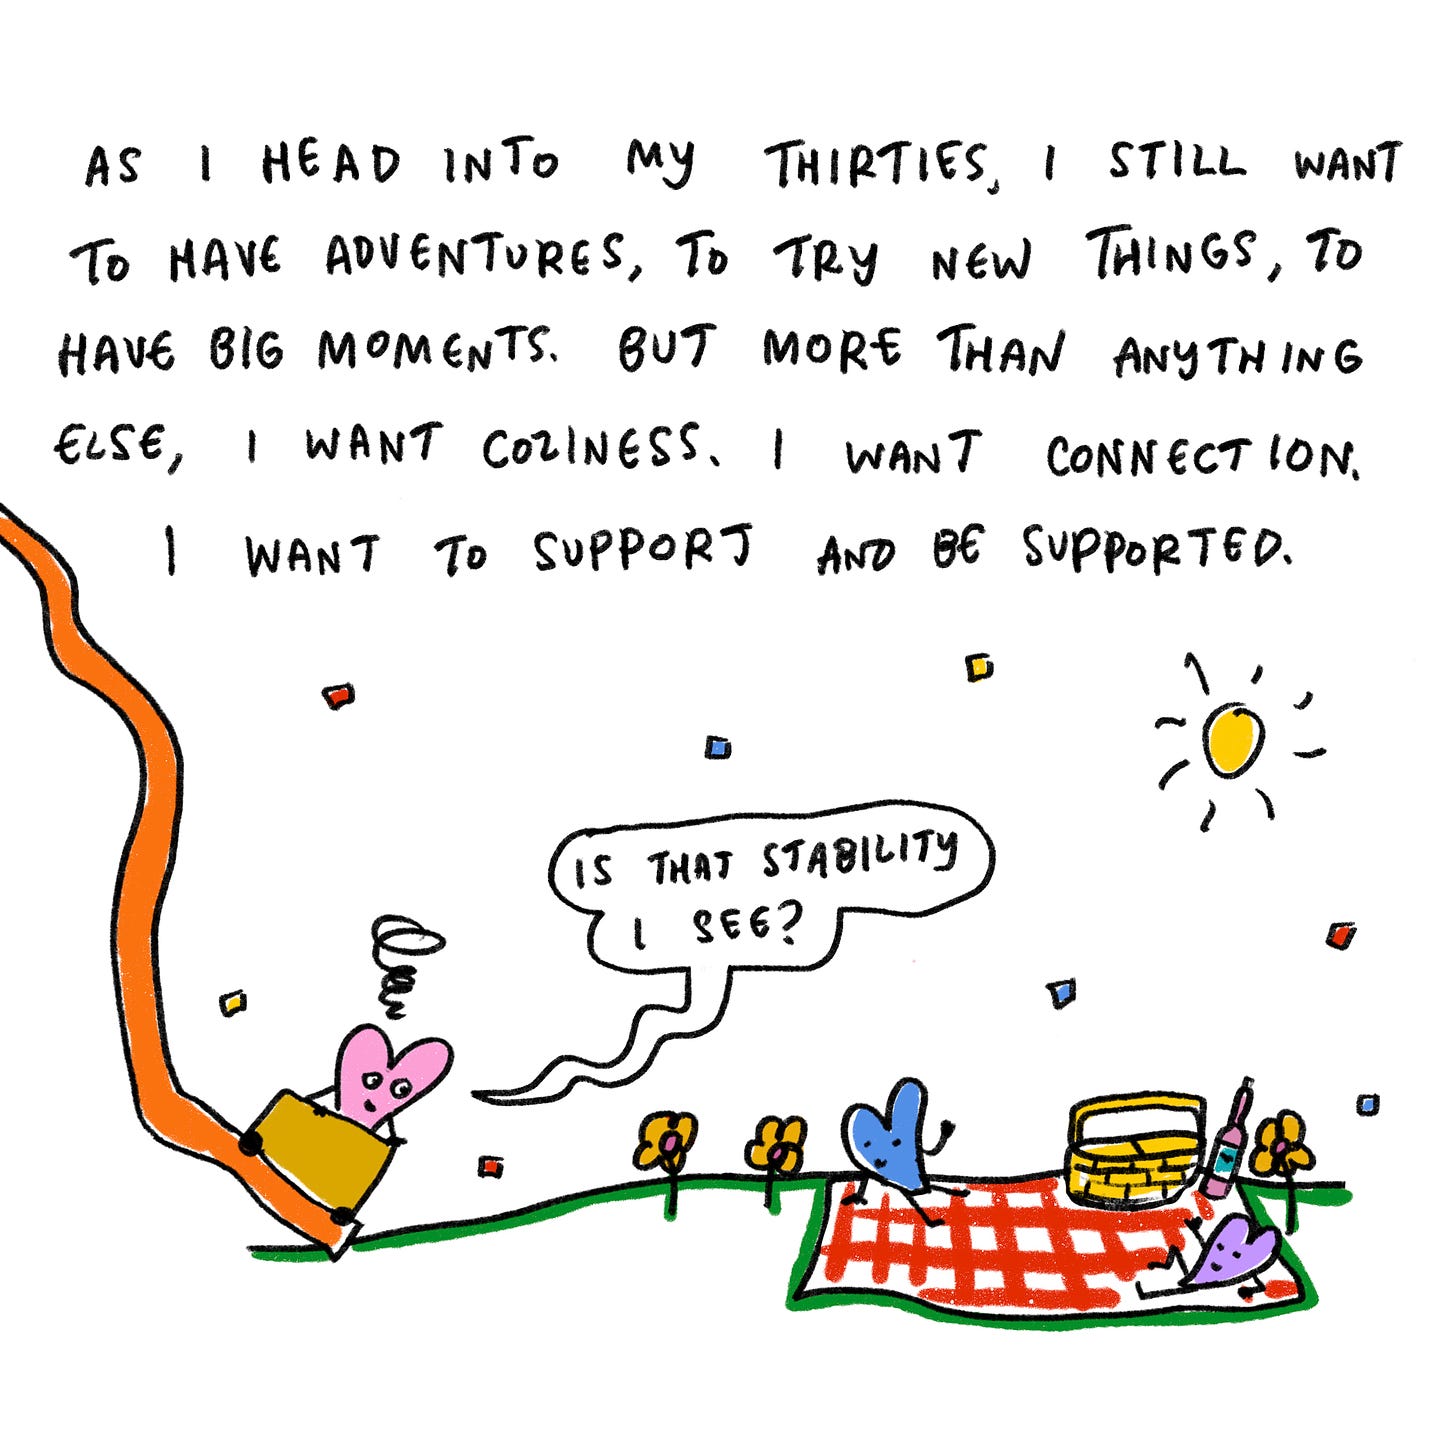 And as I head into my thirties, I still want to have adventures and try new things and have big moments. But what I want more than anything else is to feel cozy and connected and supported and supportive. 